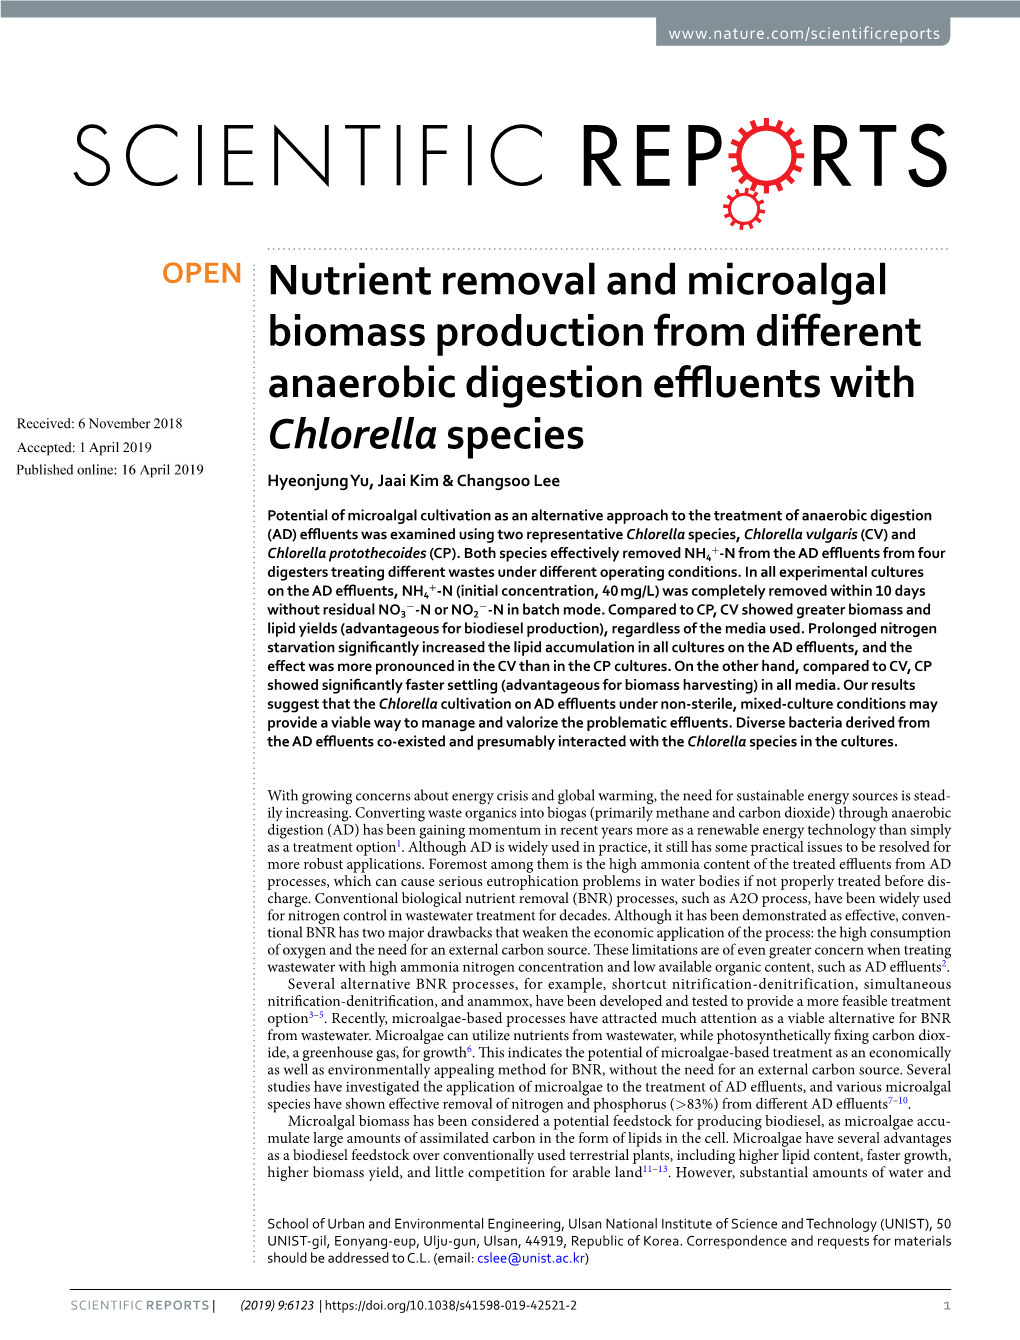 Nutrient Removal and Microalgal Biomass Production from Different